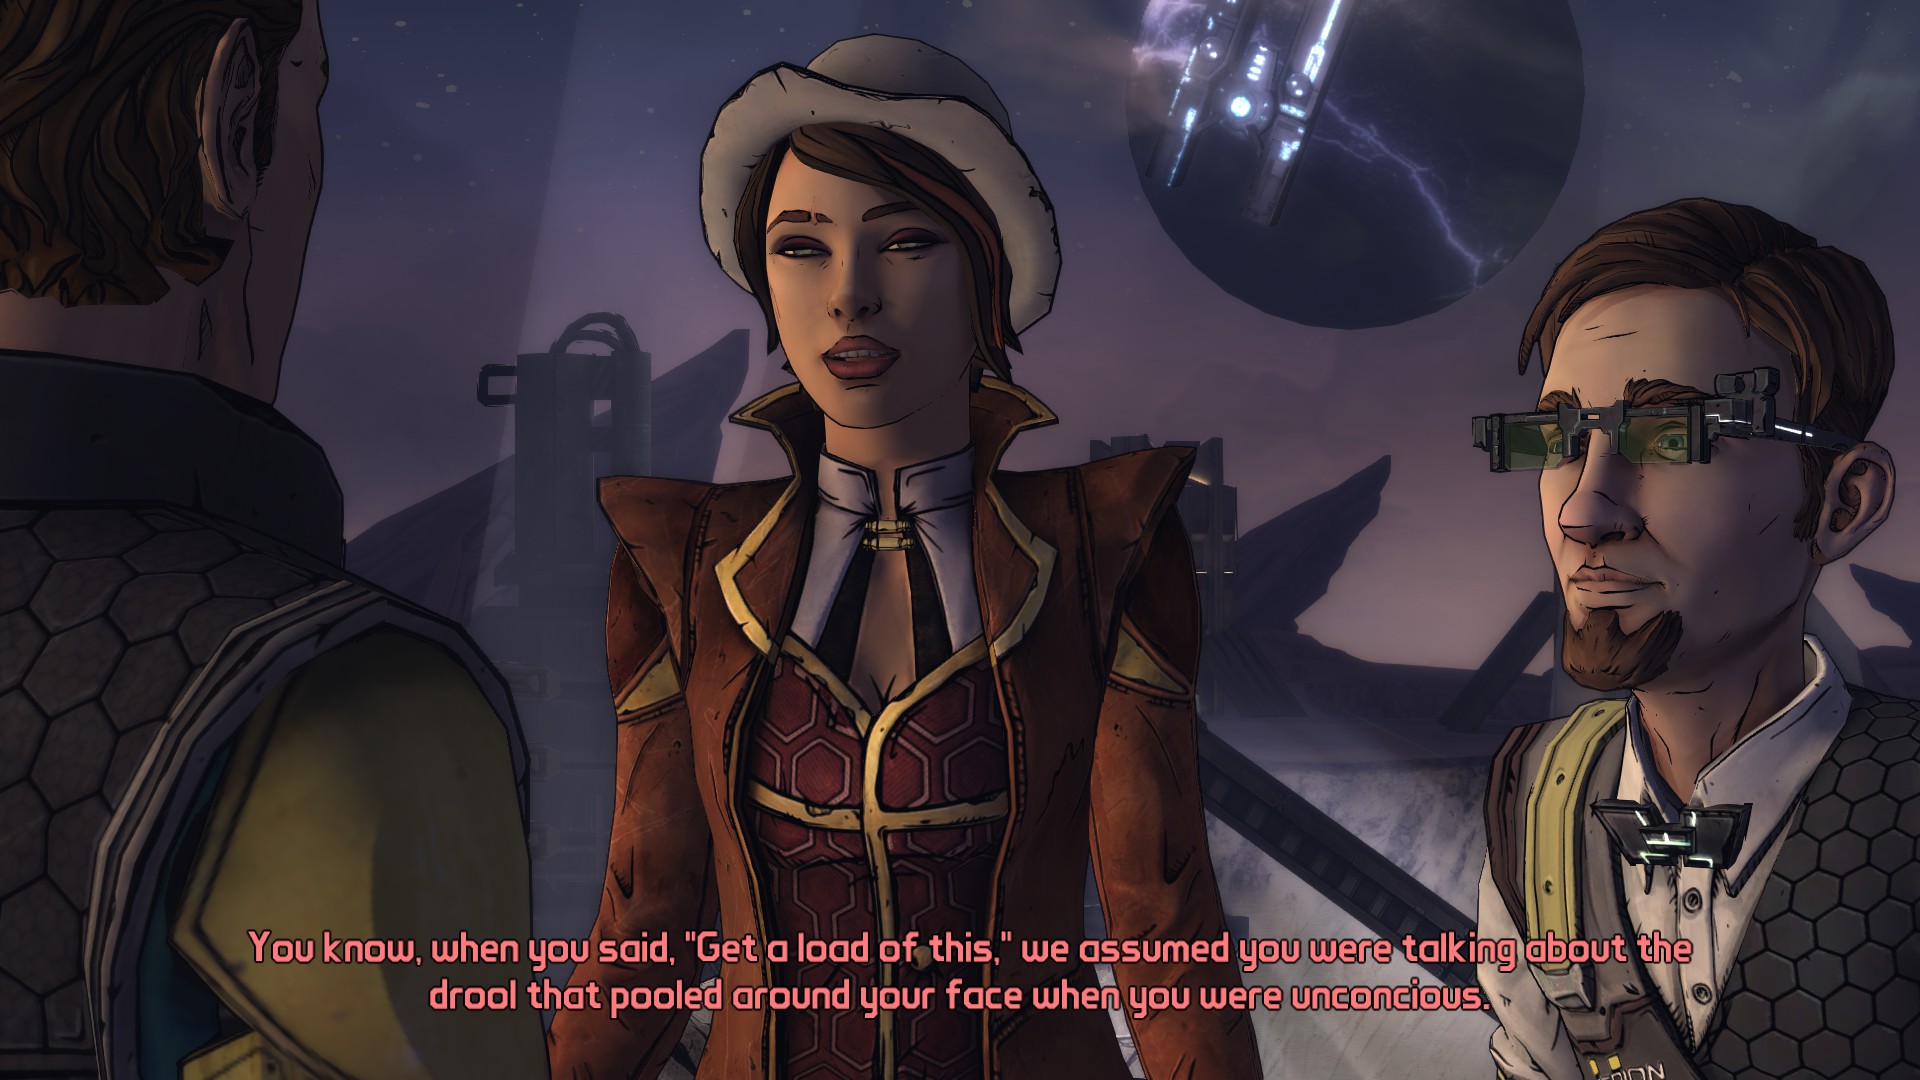 is there a new tales from the borderlands game